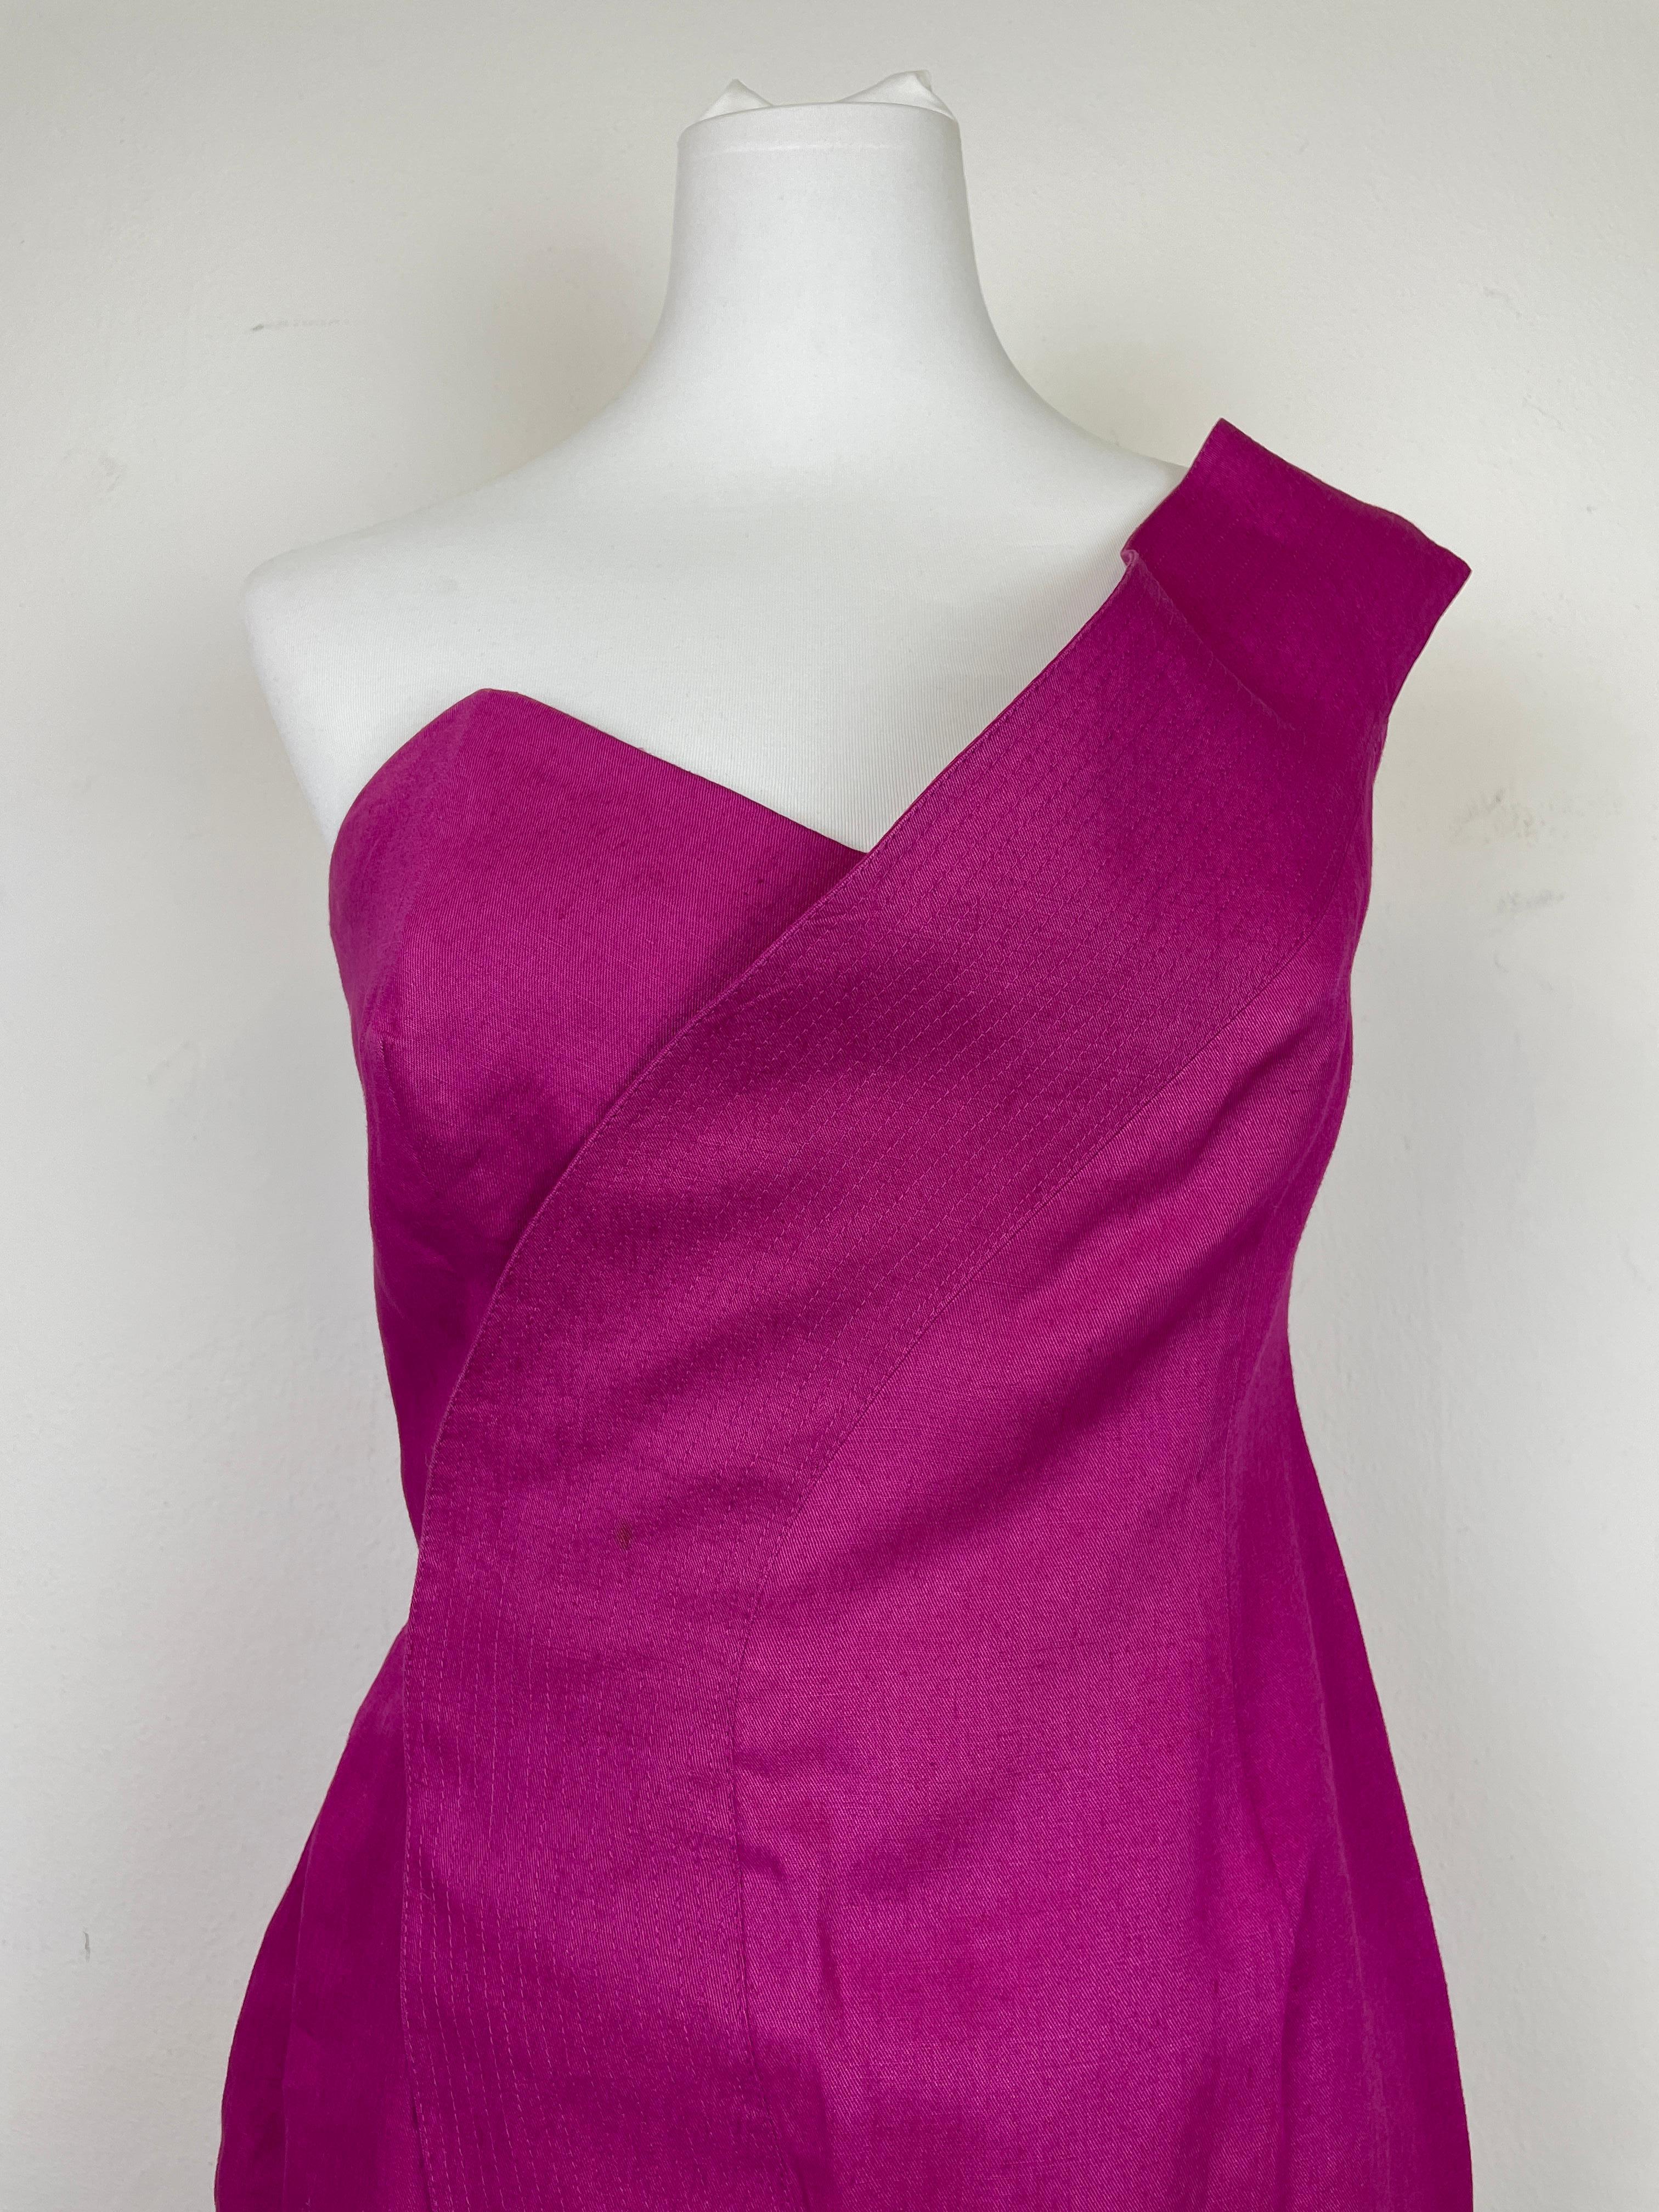 Women's Gianni Versace Pink Dress  For Sale